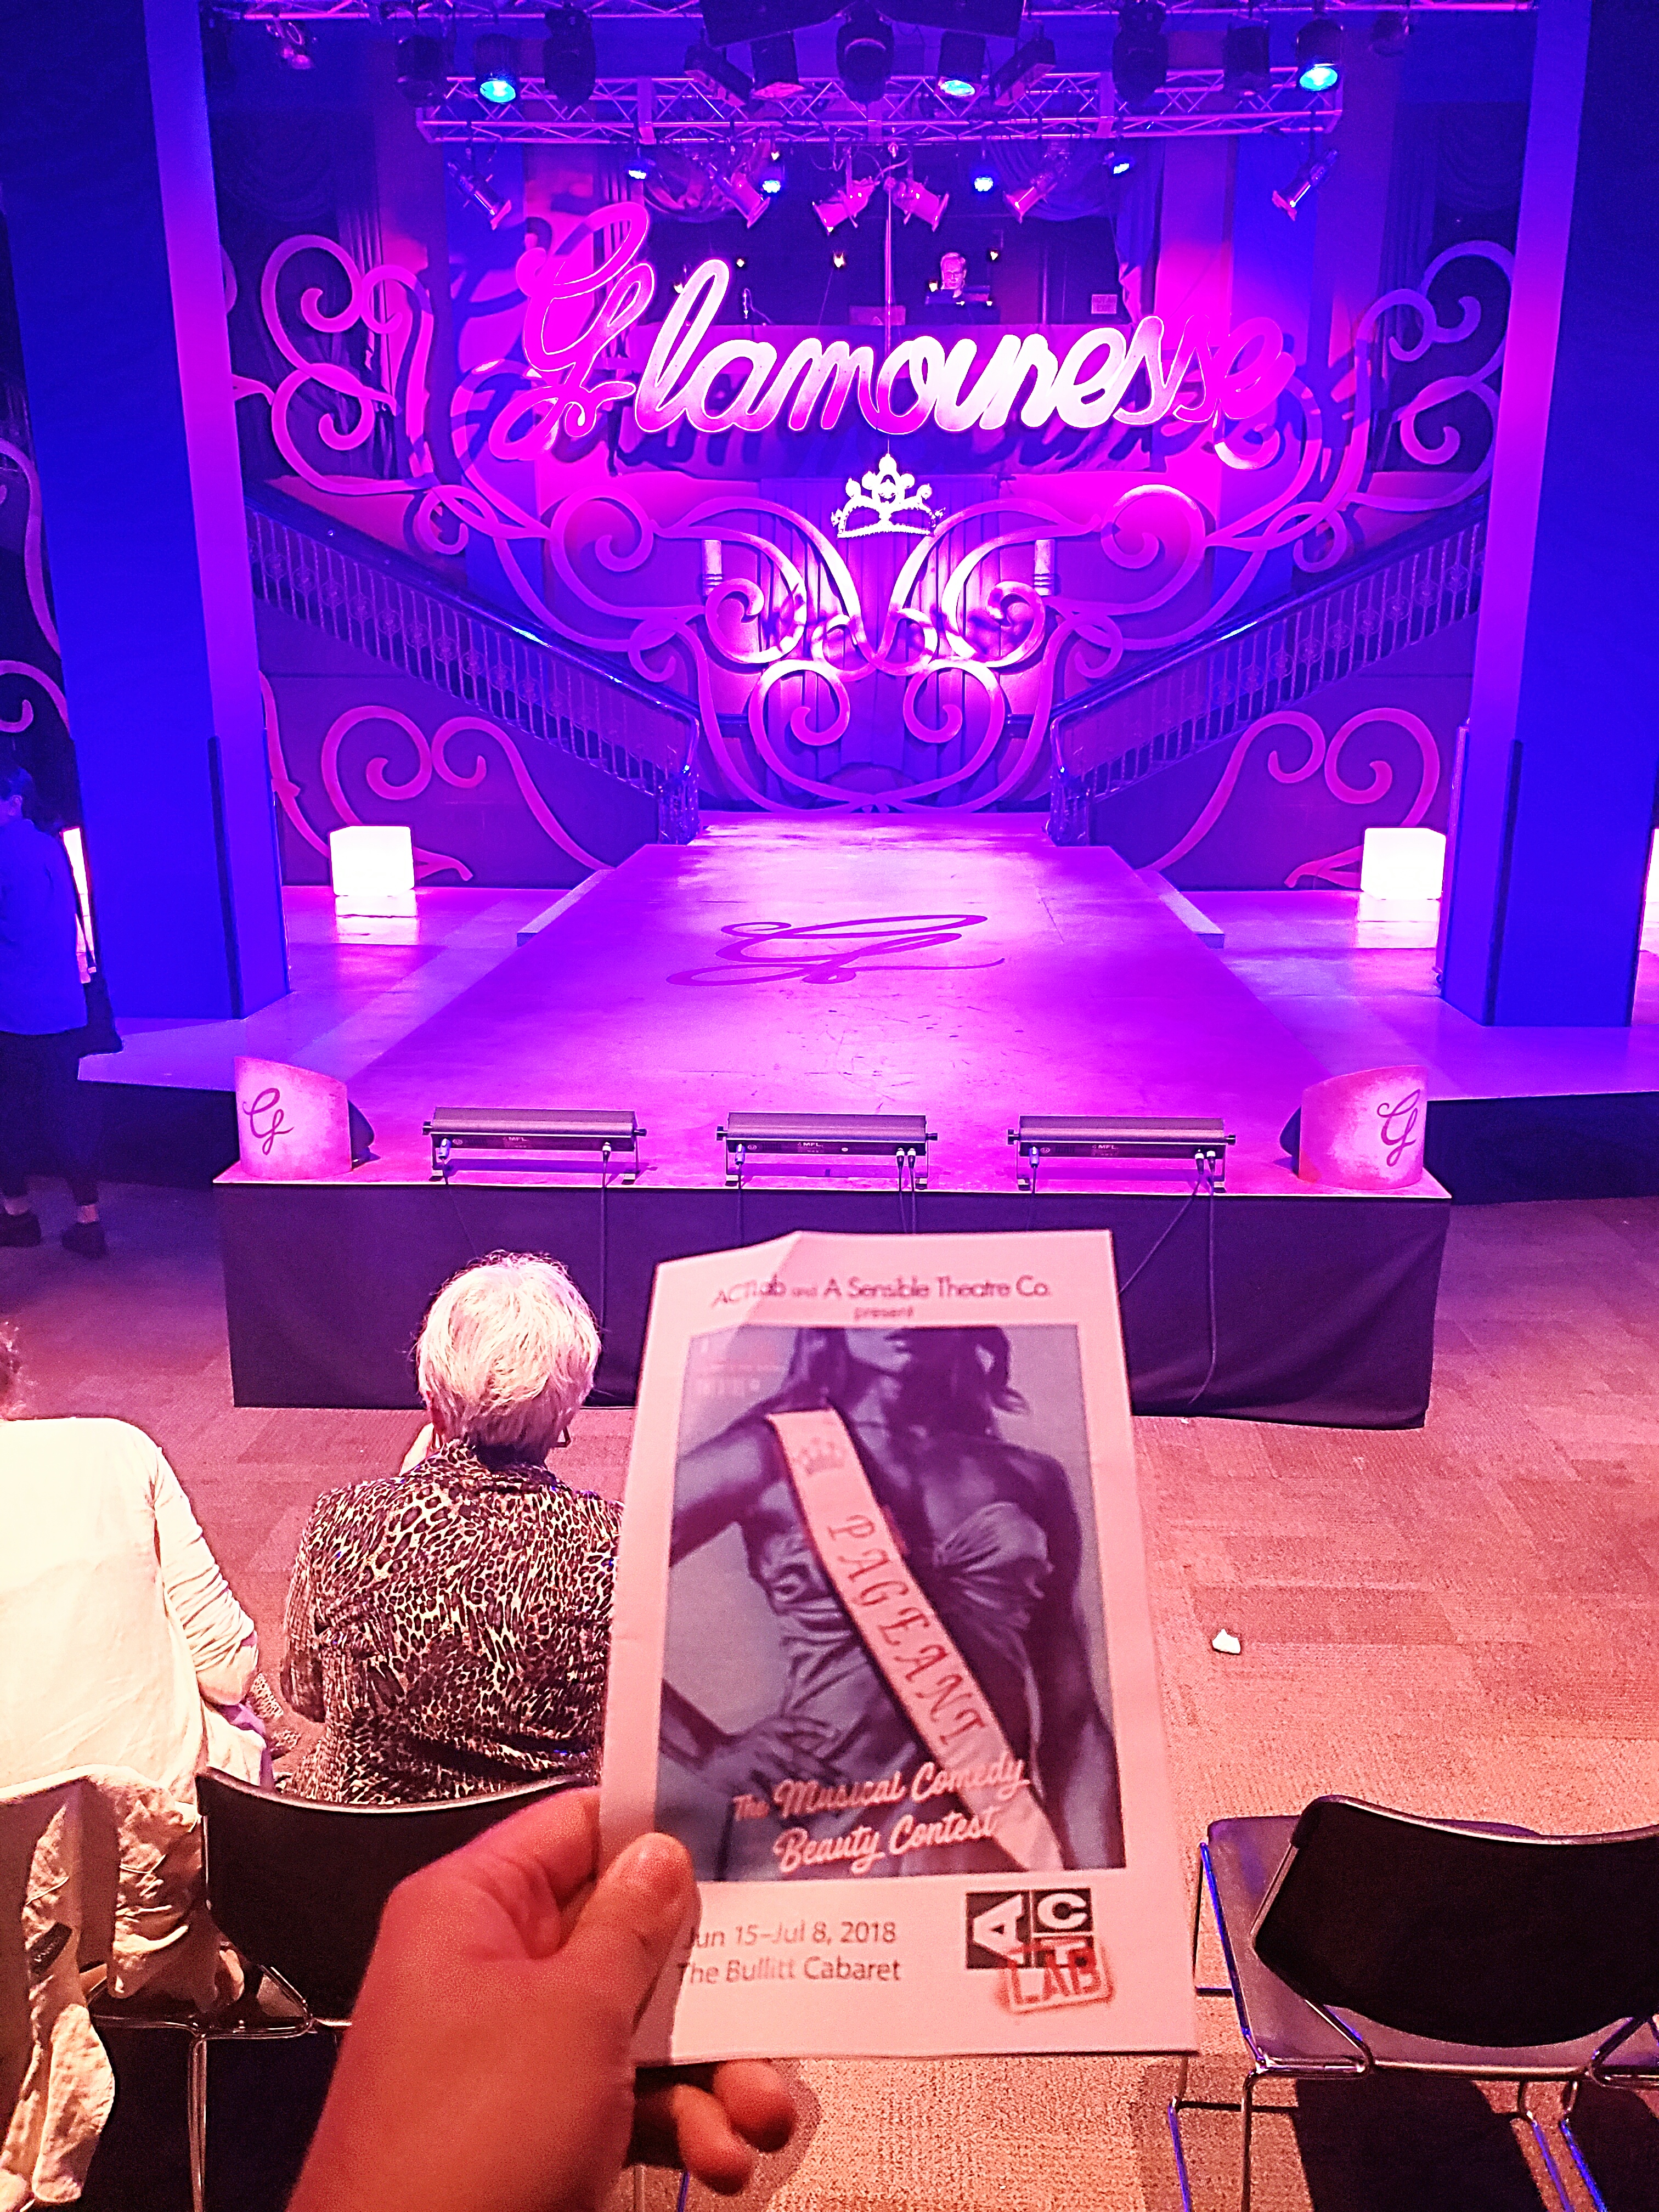 Attended Pageant - The Hilarious Comedy Musical on the second evening of Seattle Pride weekend. 6 drag queens compete for the crown ... & actually sing! Different winner each show depending on the audience. I was totally rooting for Miss Texas & Miss Bible Belt.